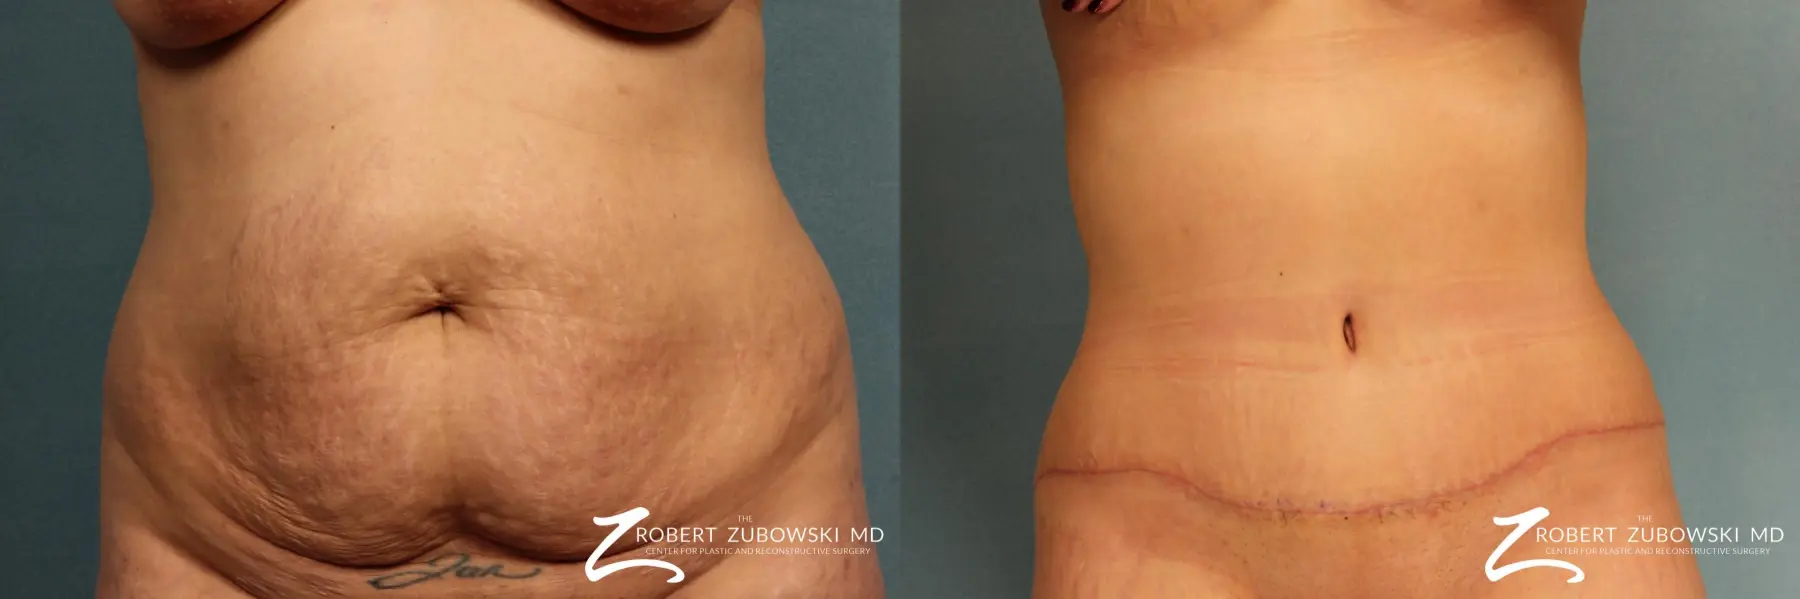 Tummy Tuck: Patient 5 - Before and After 1